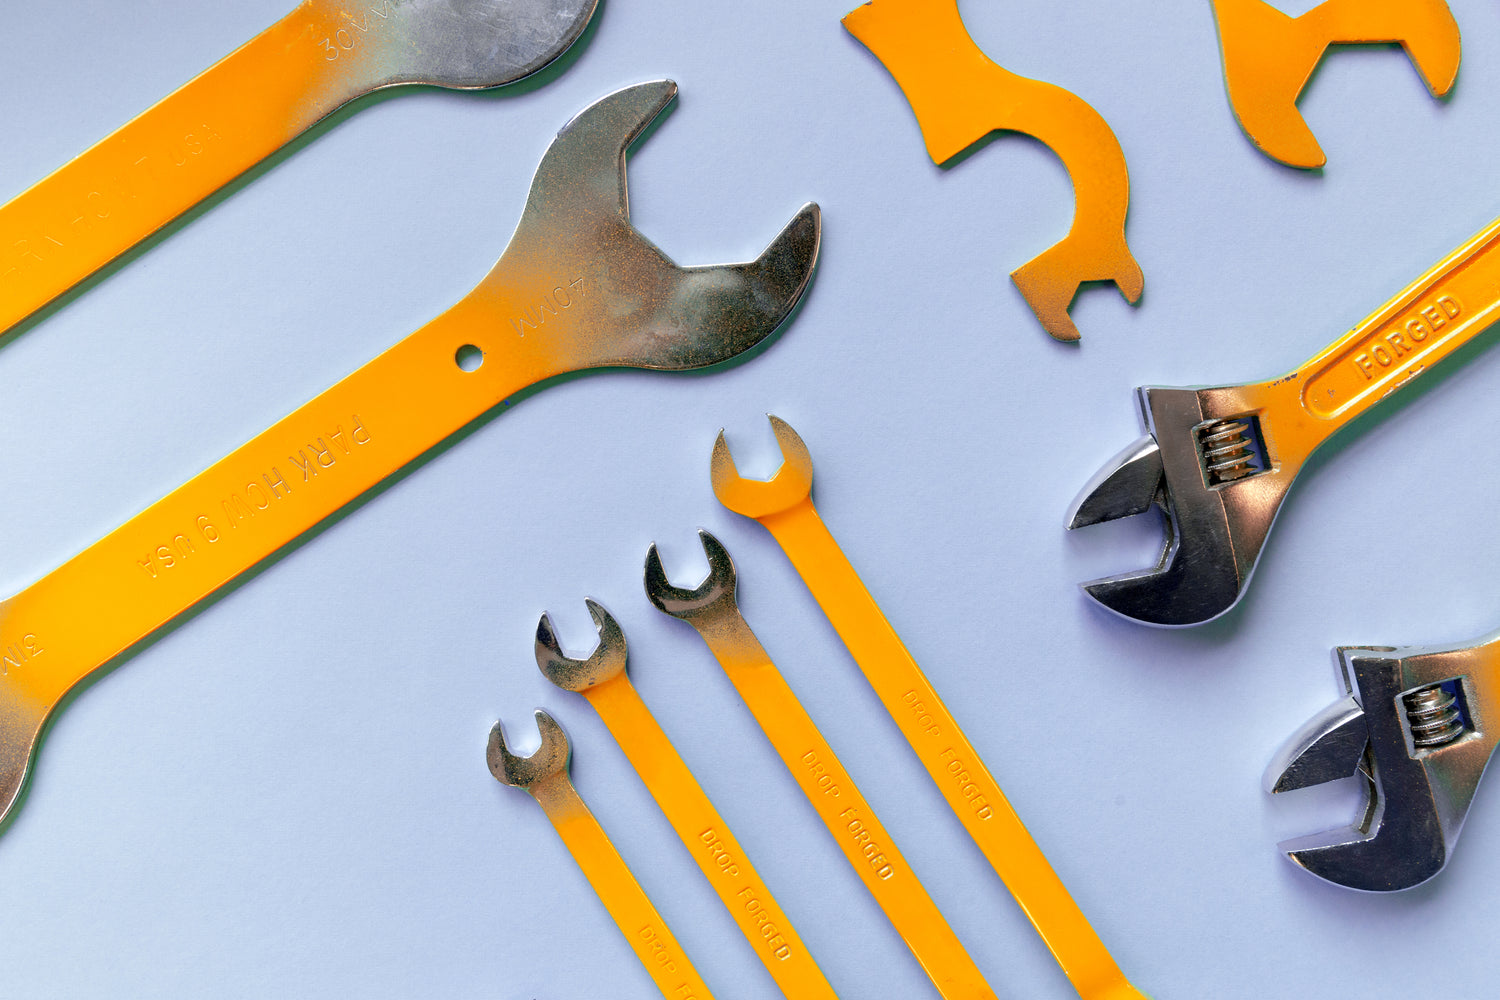 Photo of some yellow and siler wrenches and spanners on a light blue table background.